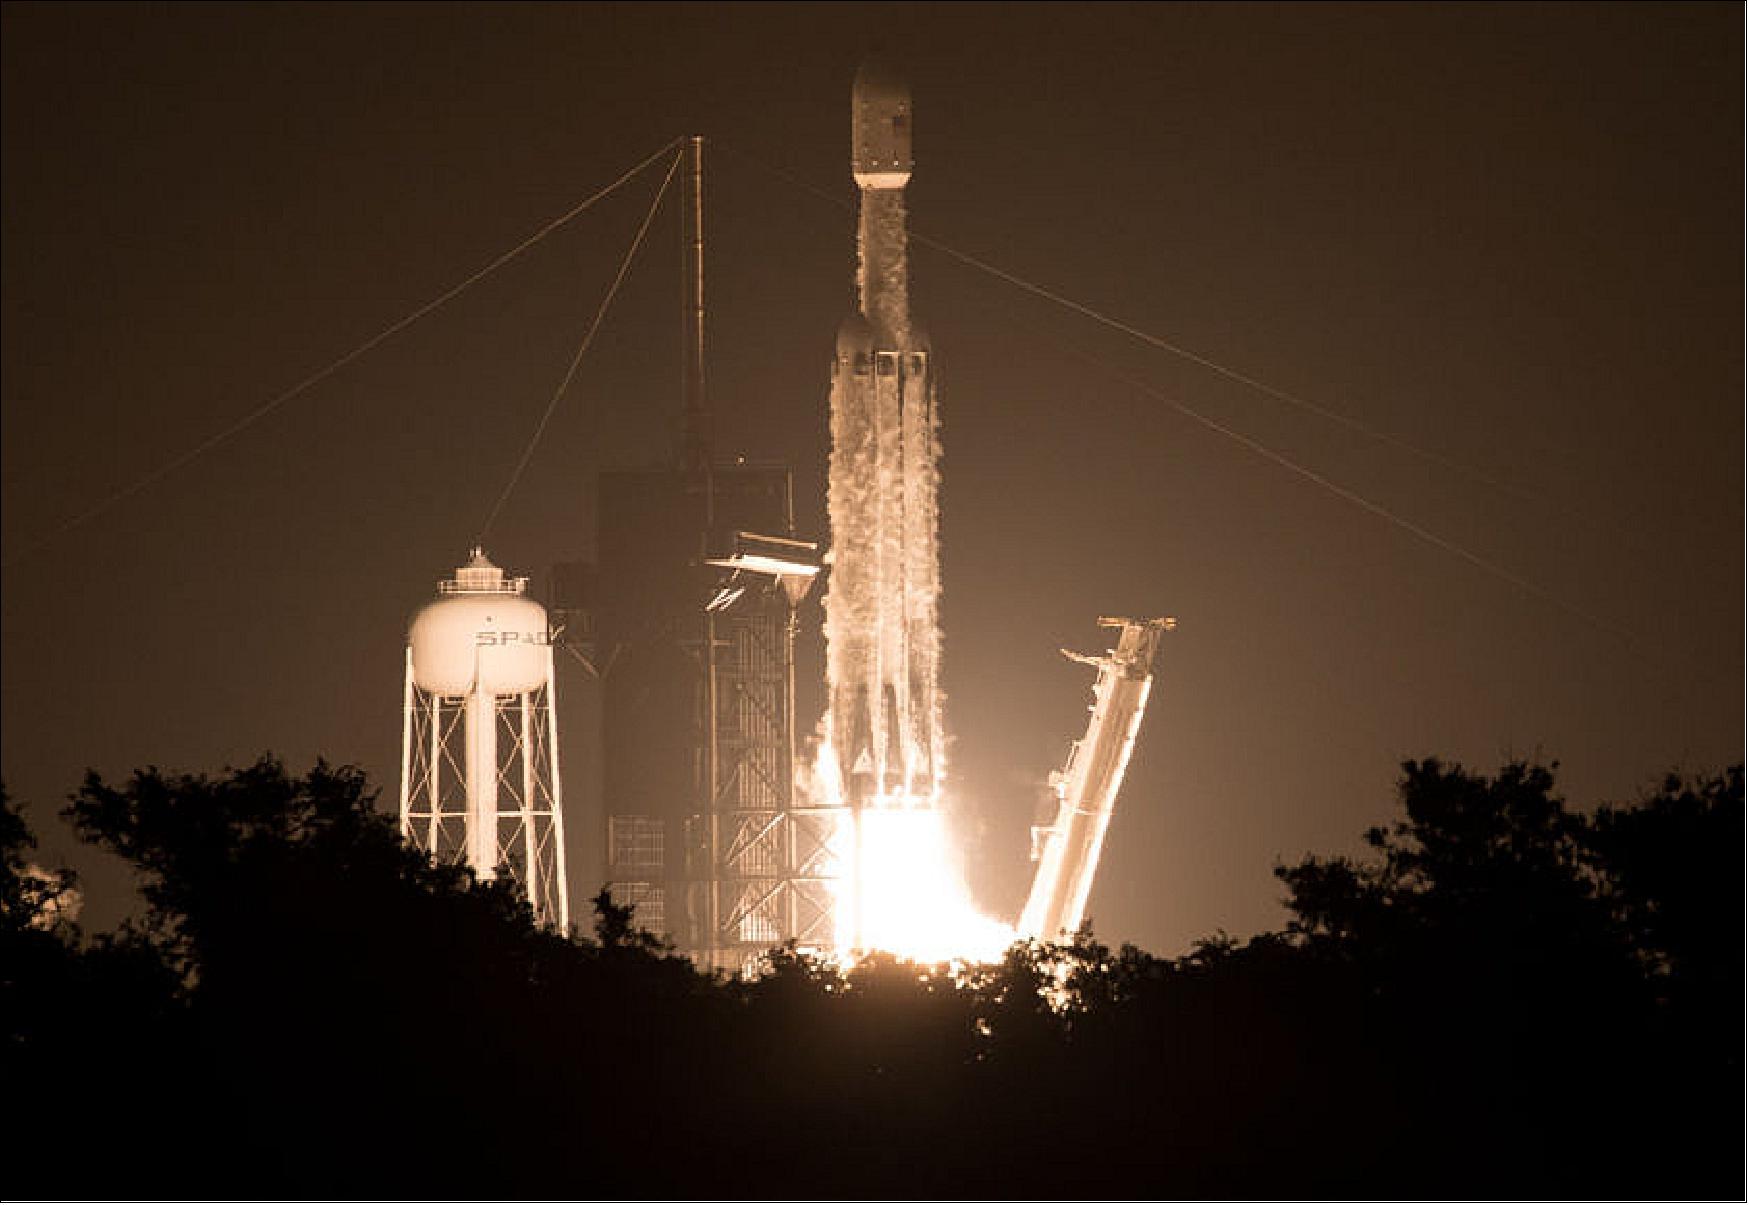 Figure 3: SpaceX's Falcon Heavy rocket, carrying LightSail-2 and 23 other spacecraft for the U.S. Air Force's STP-2 mission, lifts off from Kennedy Space Center on 25 June 2019 at 06:30 UTC (image credit: NASA)